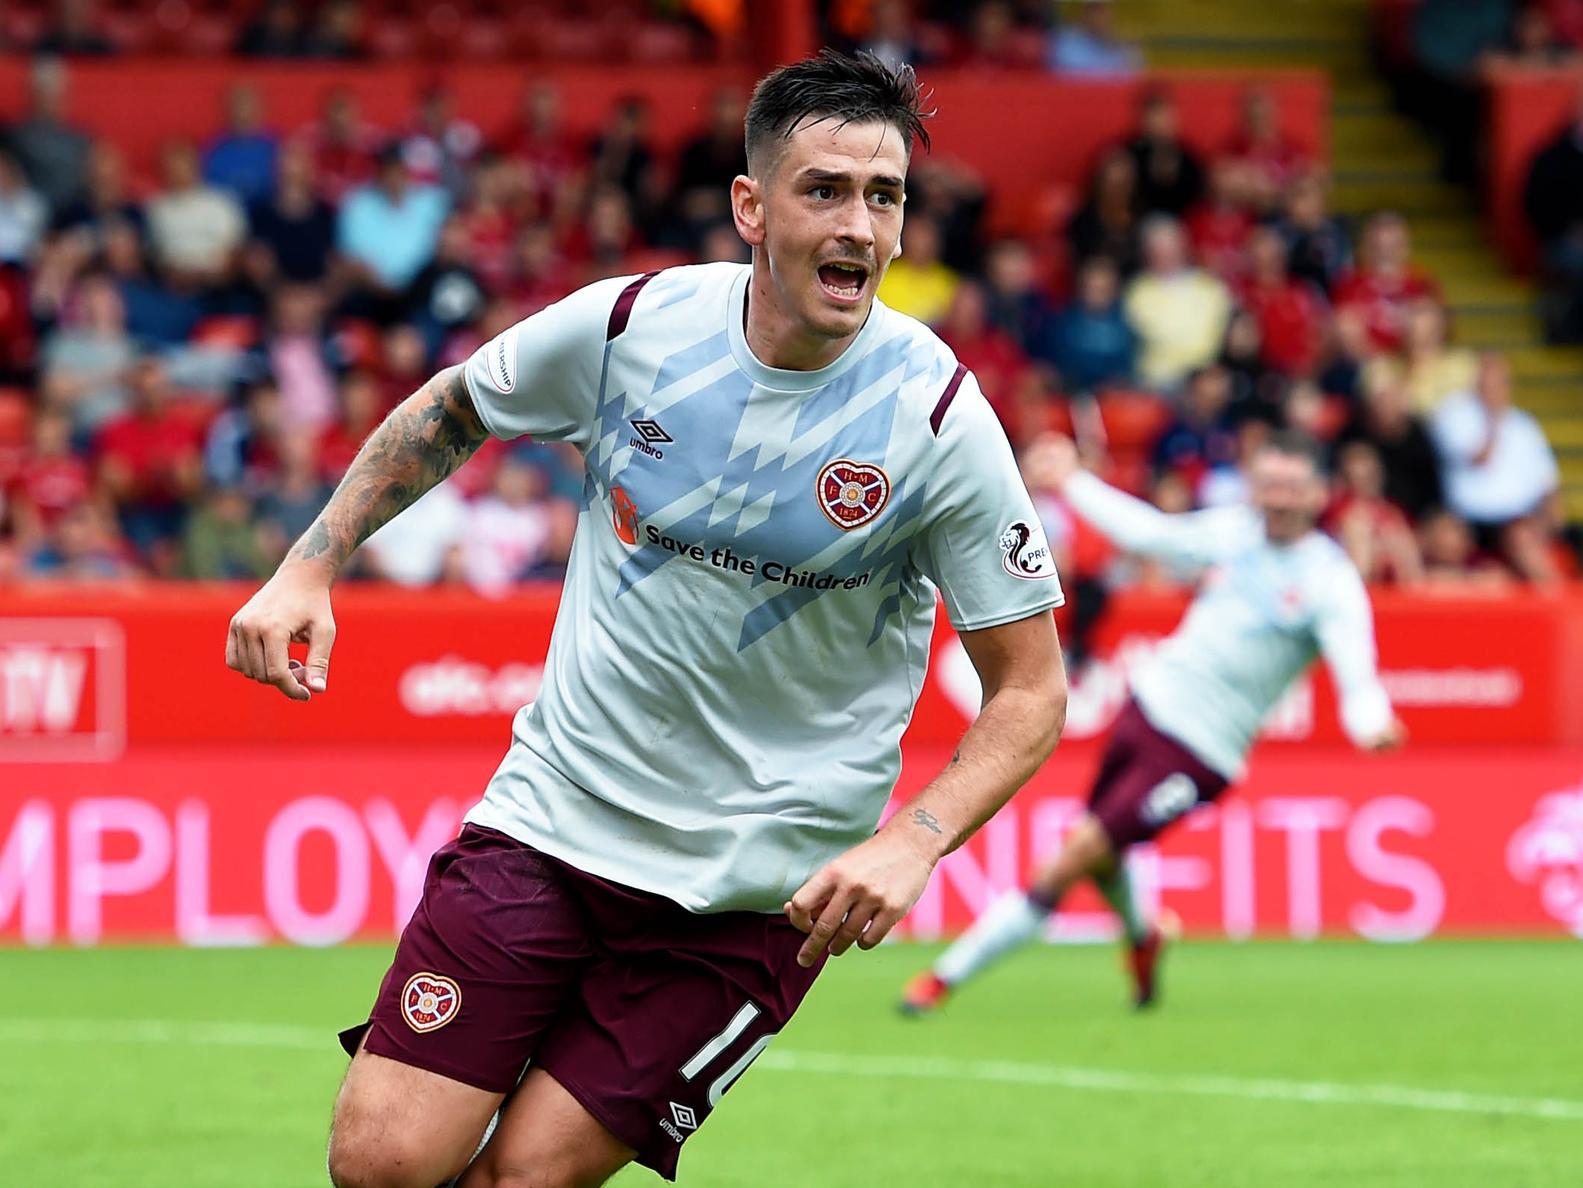 First start in two months and was probably Hearts' best player. Caused Celtic problems in first half.